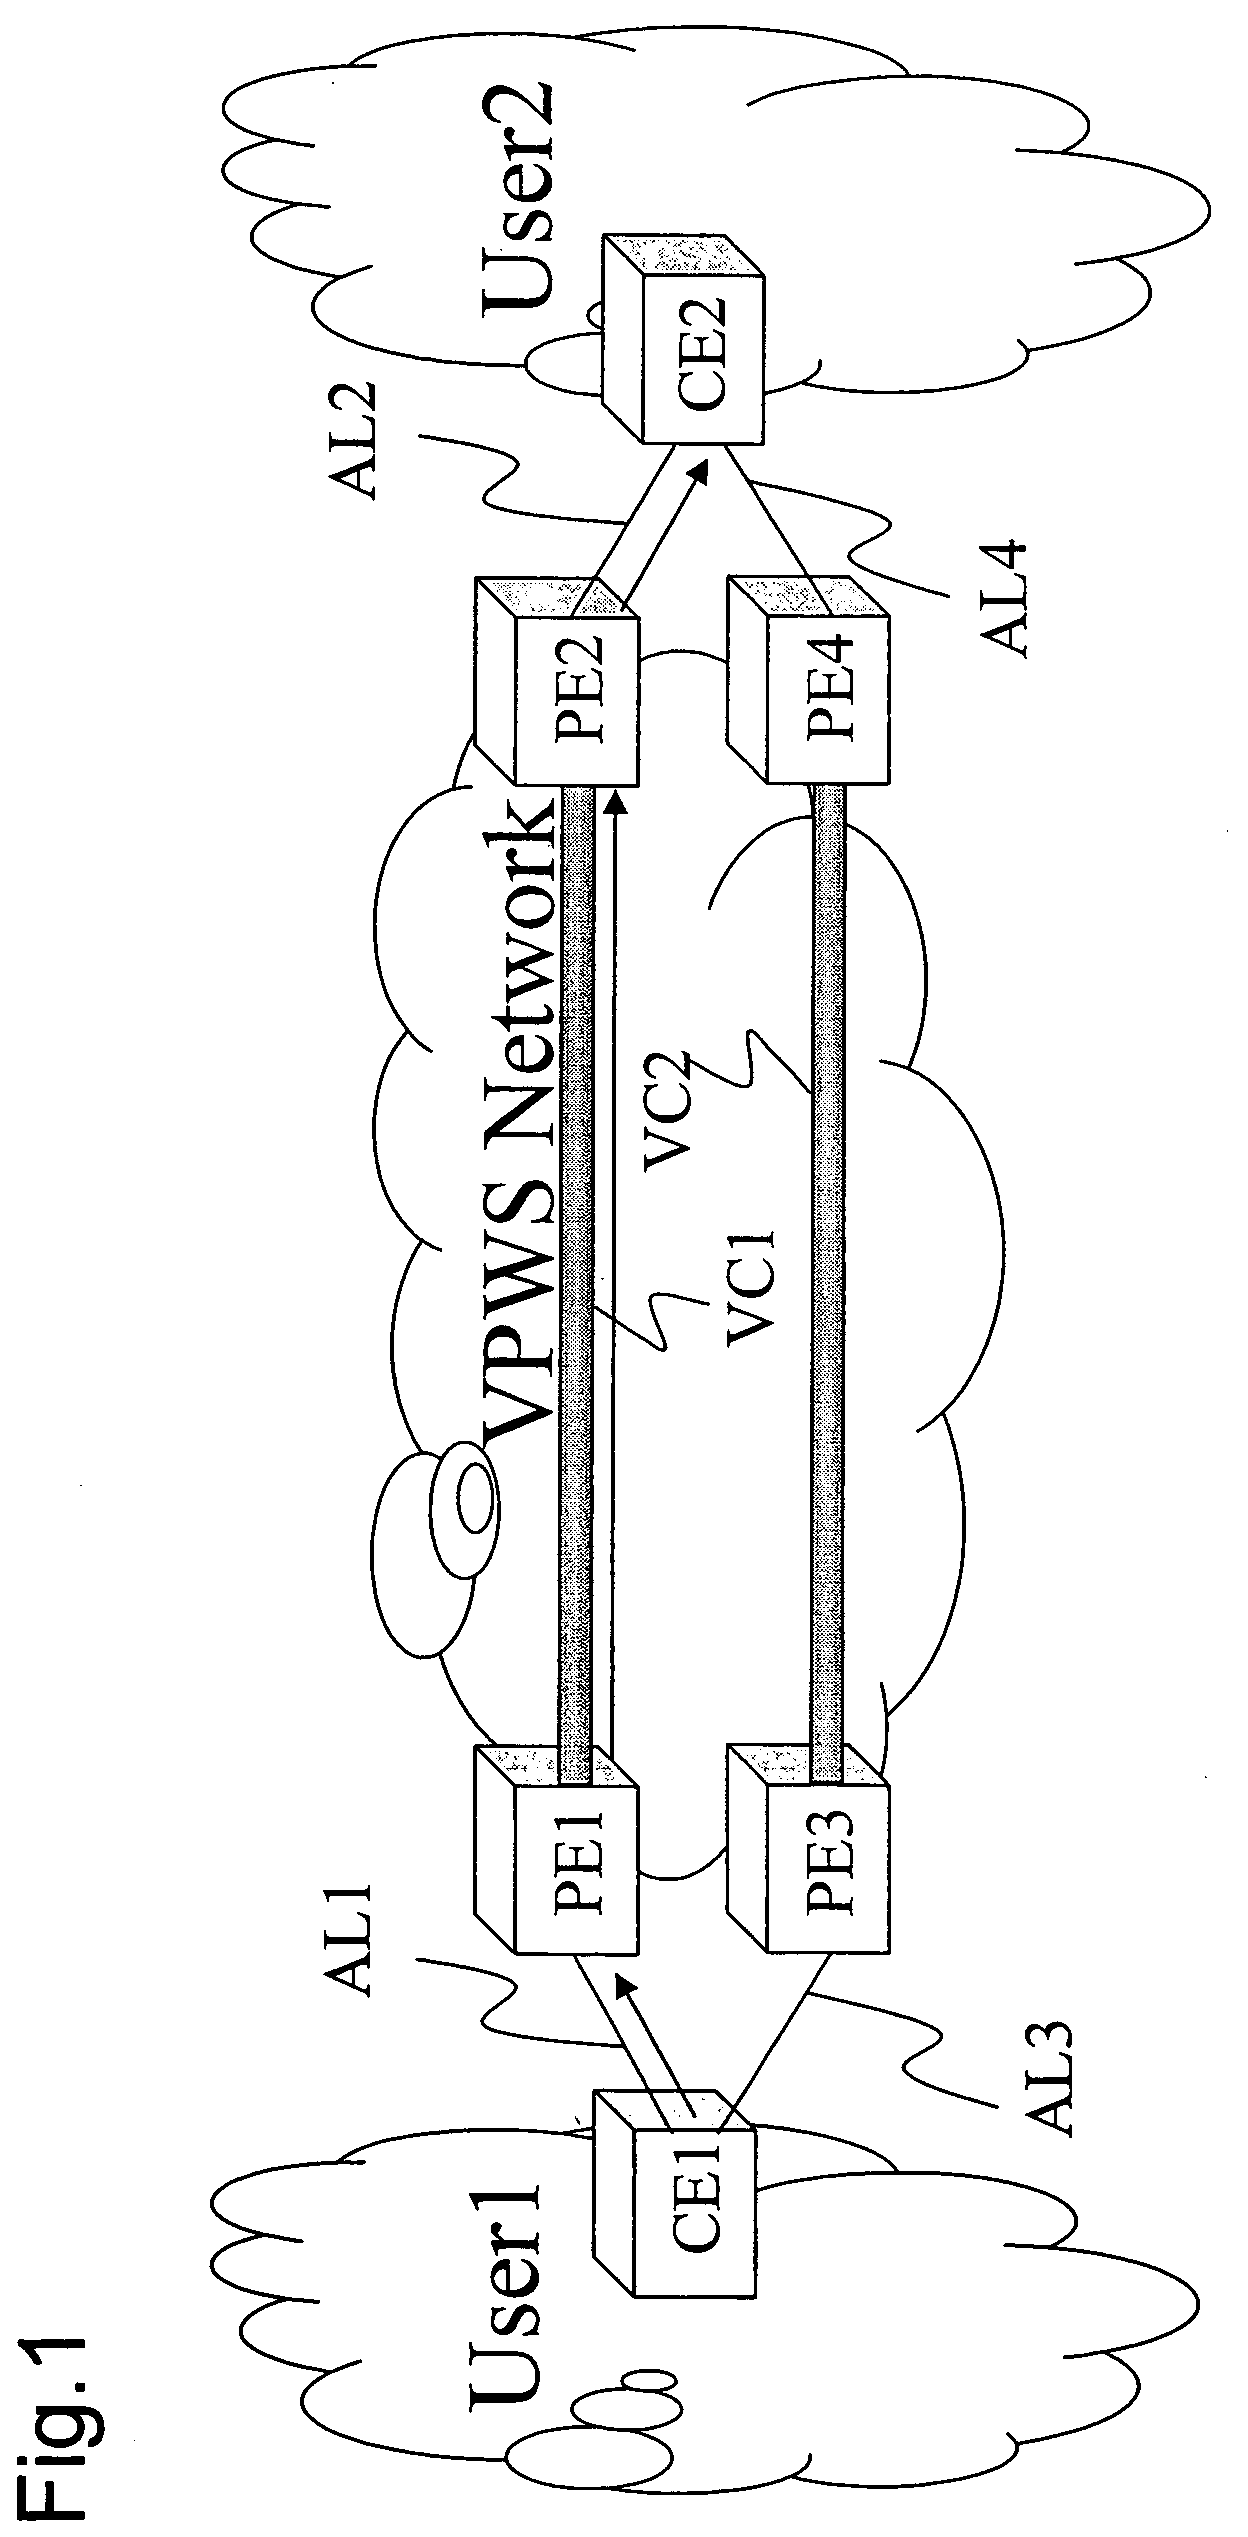 Data communication device and the method thereof